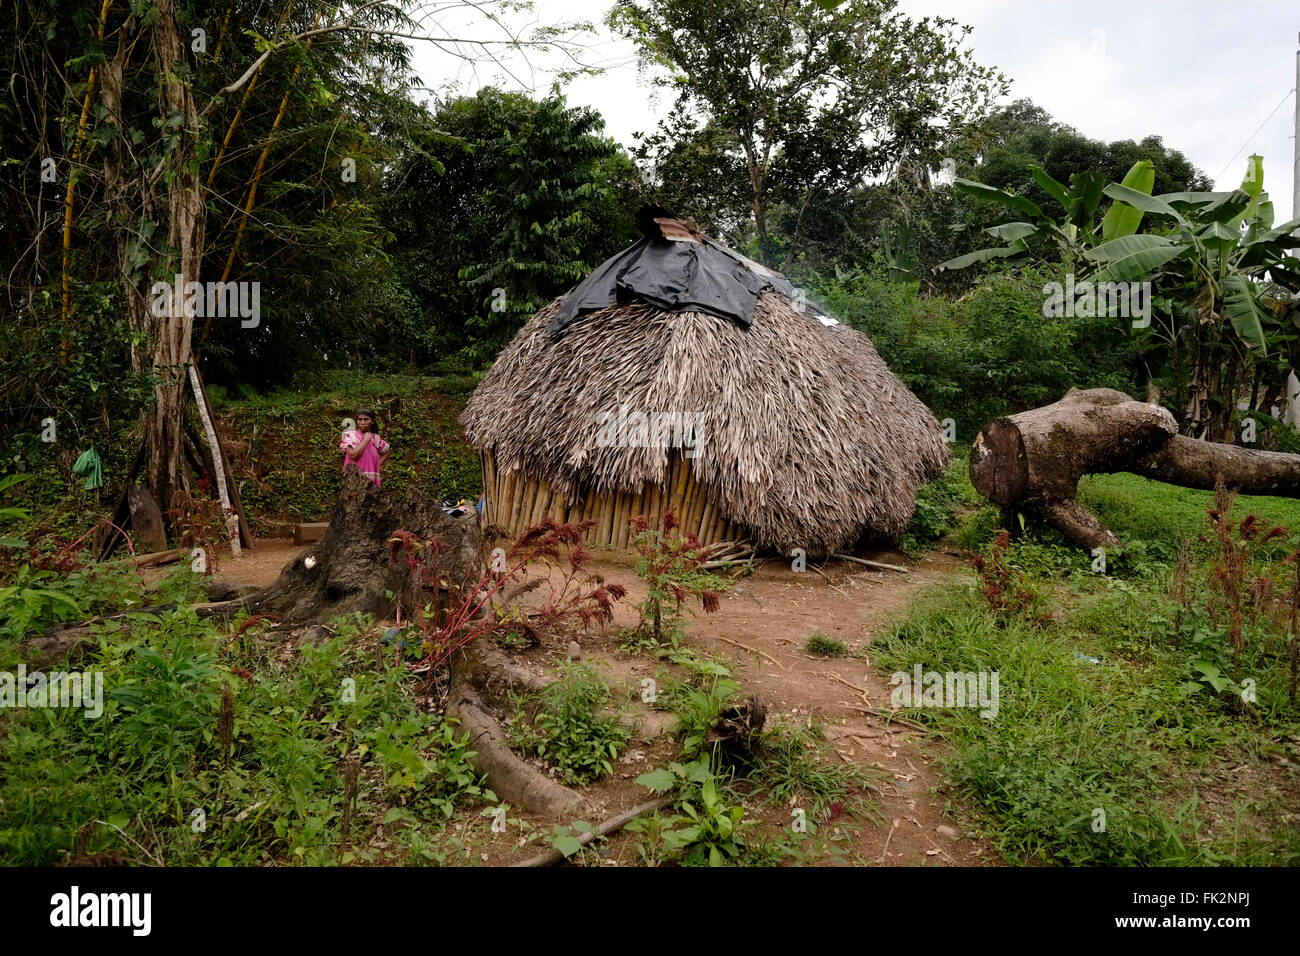 Straw huts of the Ngabe & Bugle native ethnic group located in the Comarca Quebrado region, Guabo reservation in Chiriqui province Republic of Panama Stock Photo